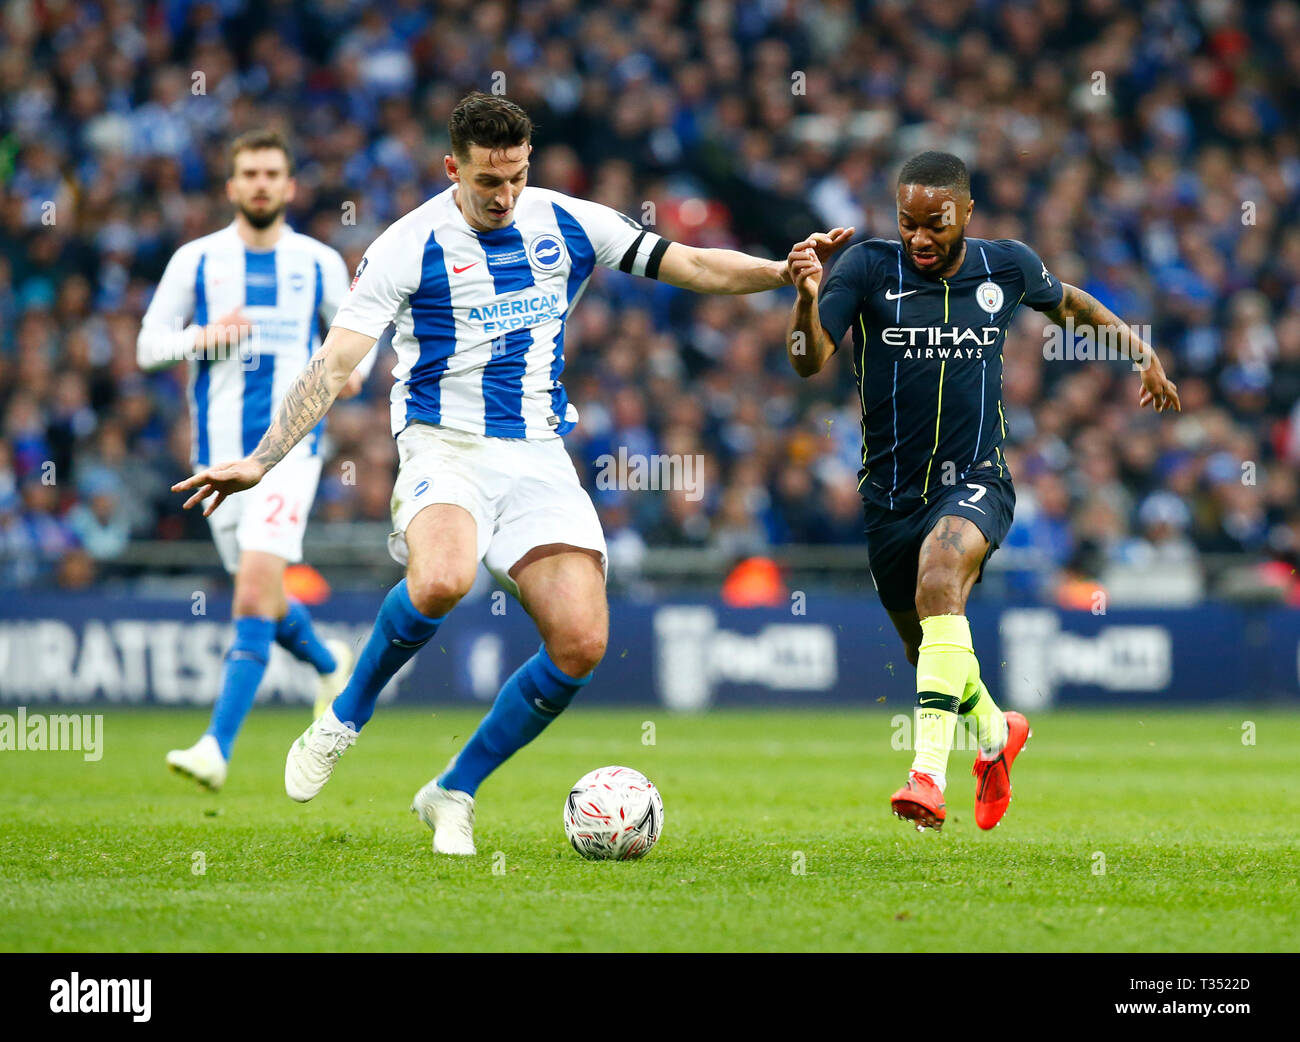 London, United Kingdom. 06th Apr, 2019. L-R Brighton & Hove Albion's Lewis Dunk and Manchester City's Raheem Sterling during The FA Emirates Cup Semi-Final match between Manchester City and Brighton & Hove Albion at Wembley Stadium, London, UK on 06 Apr 2019. Credit: Action Foto Sport/Alamy Live News Stock Photo